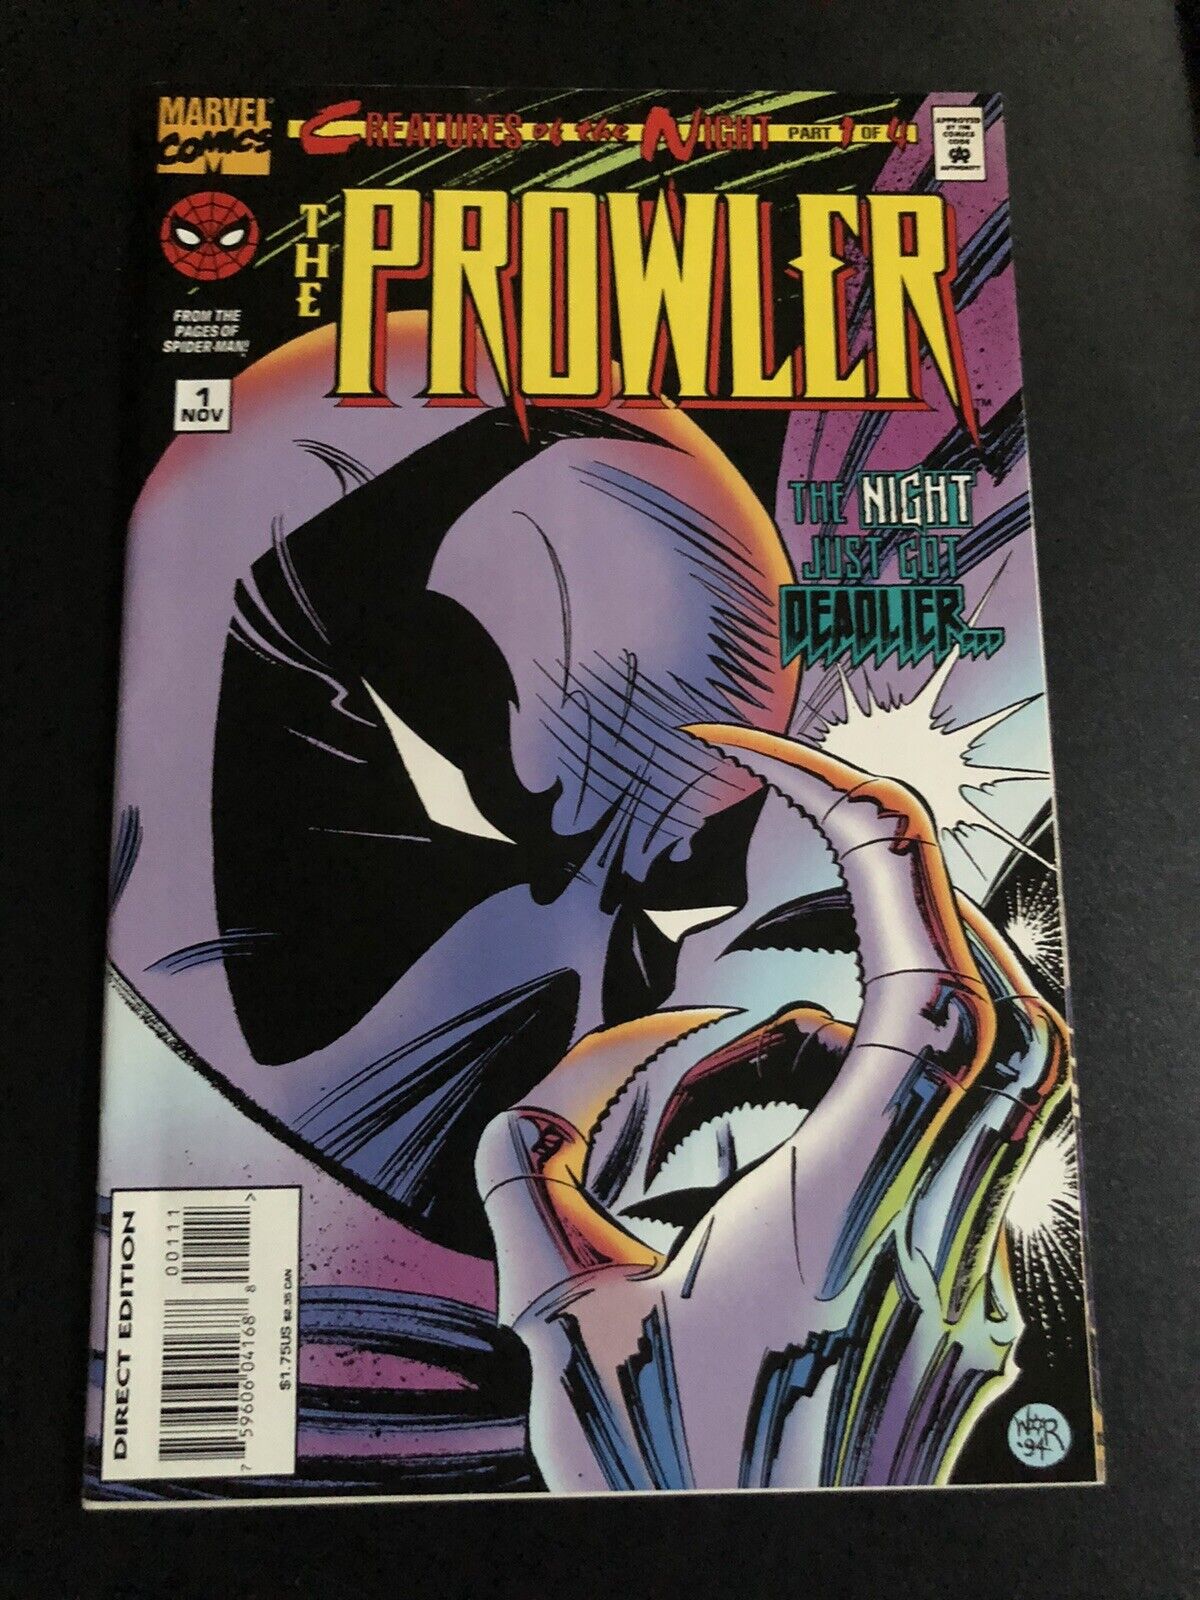 Marvel Comics - THE PROWLER #1 Creatures of the Night Part 1 of 4